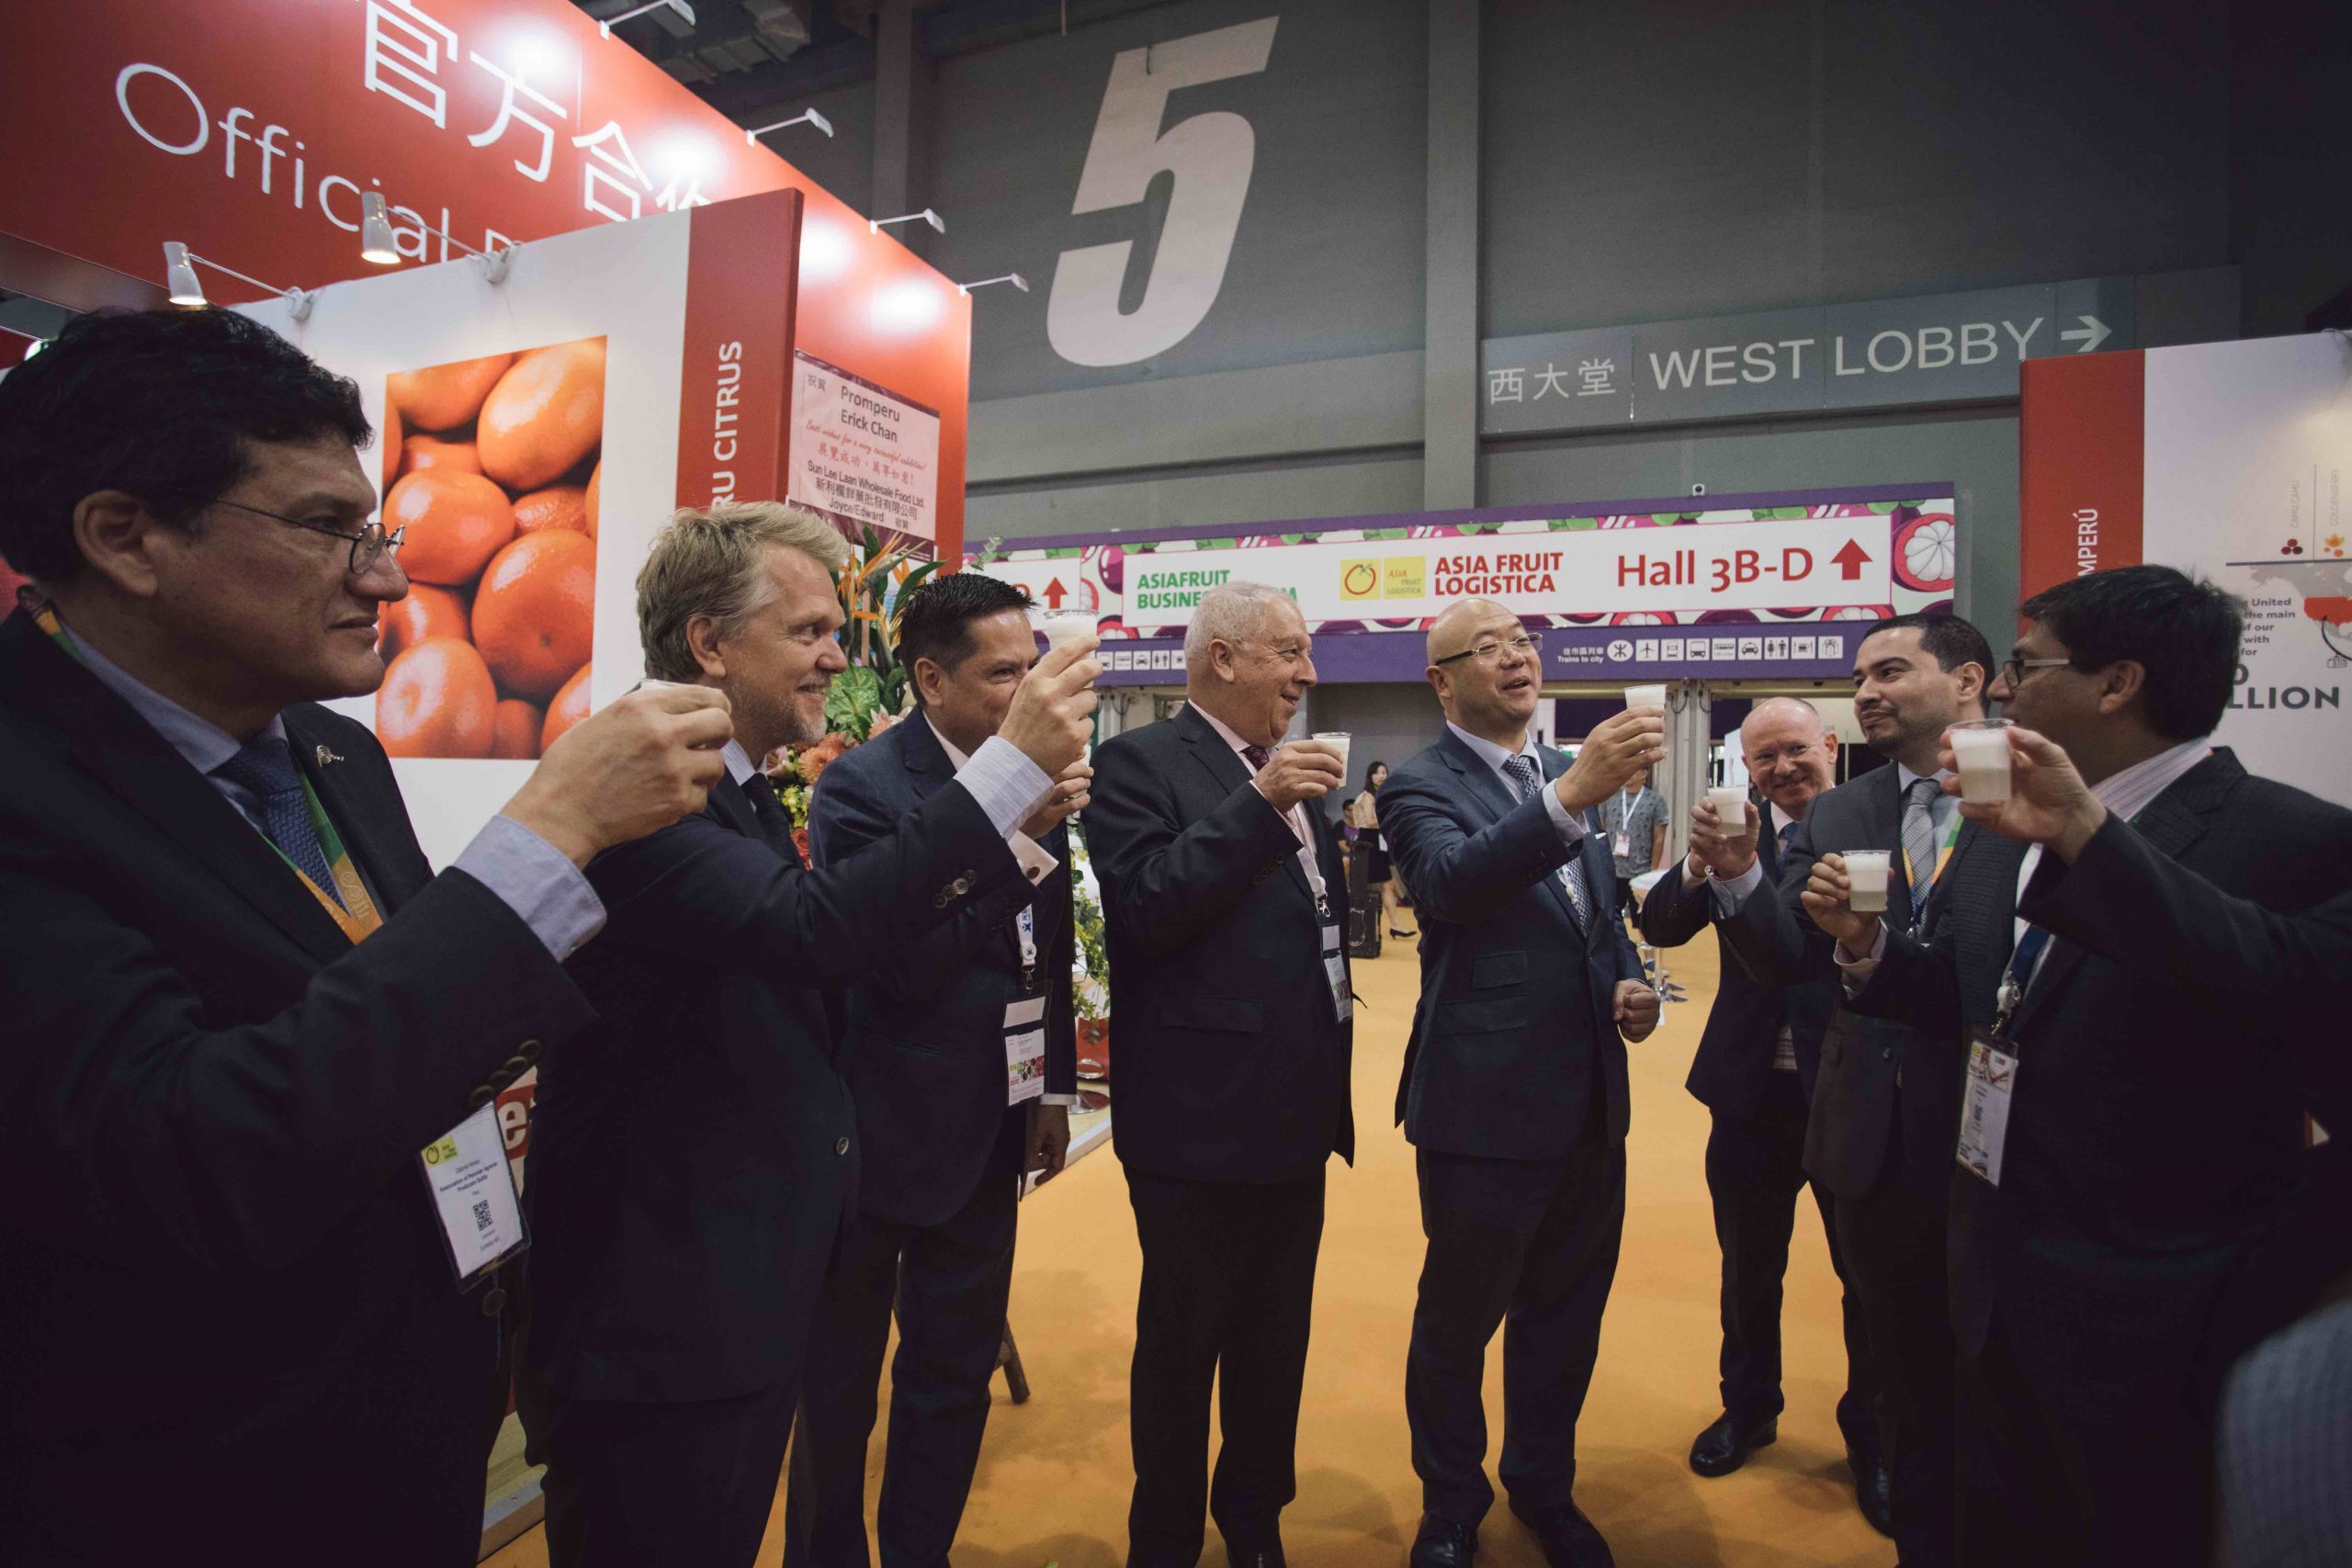 Peru conquers Asian markets as a Partner Country at Asia Fruit Logistica 2019